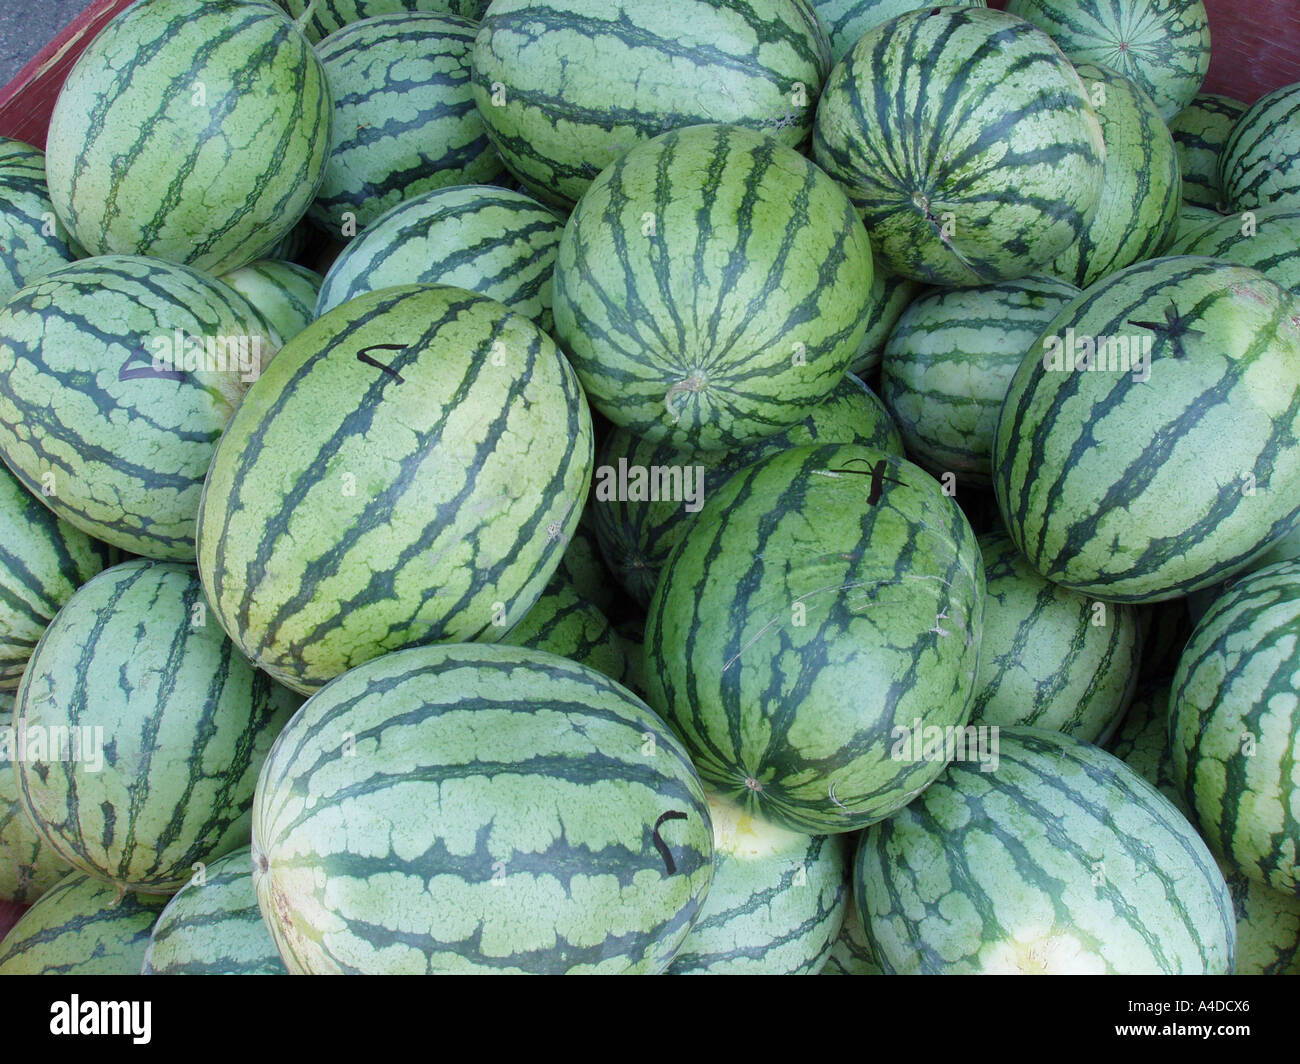 Download Shopping For Melons